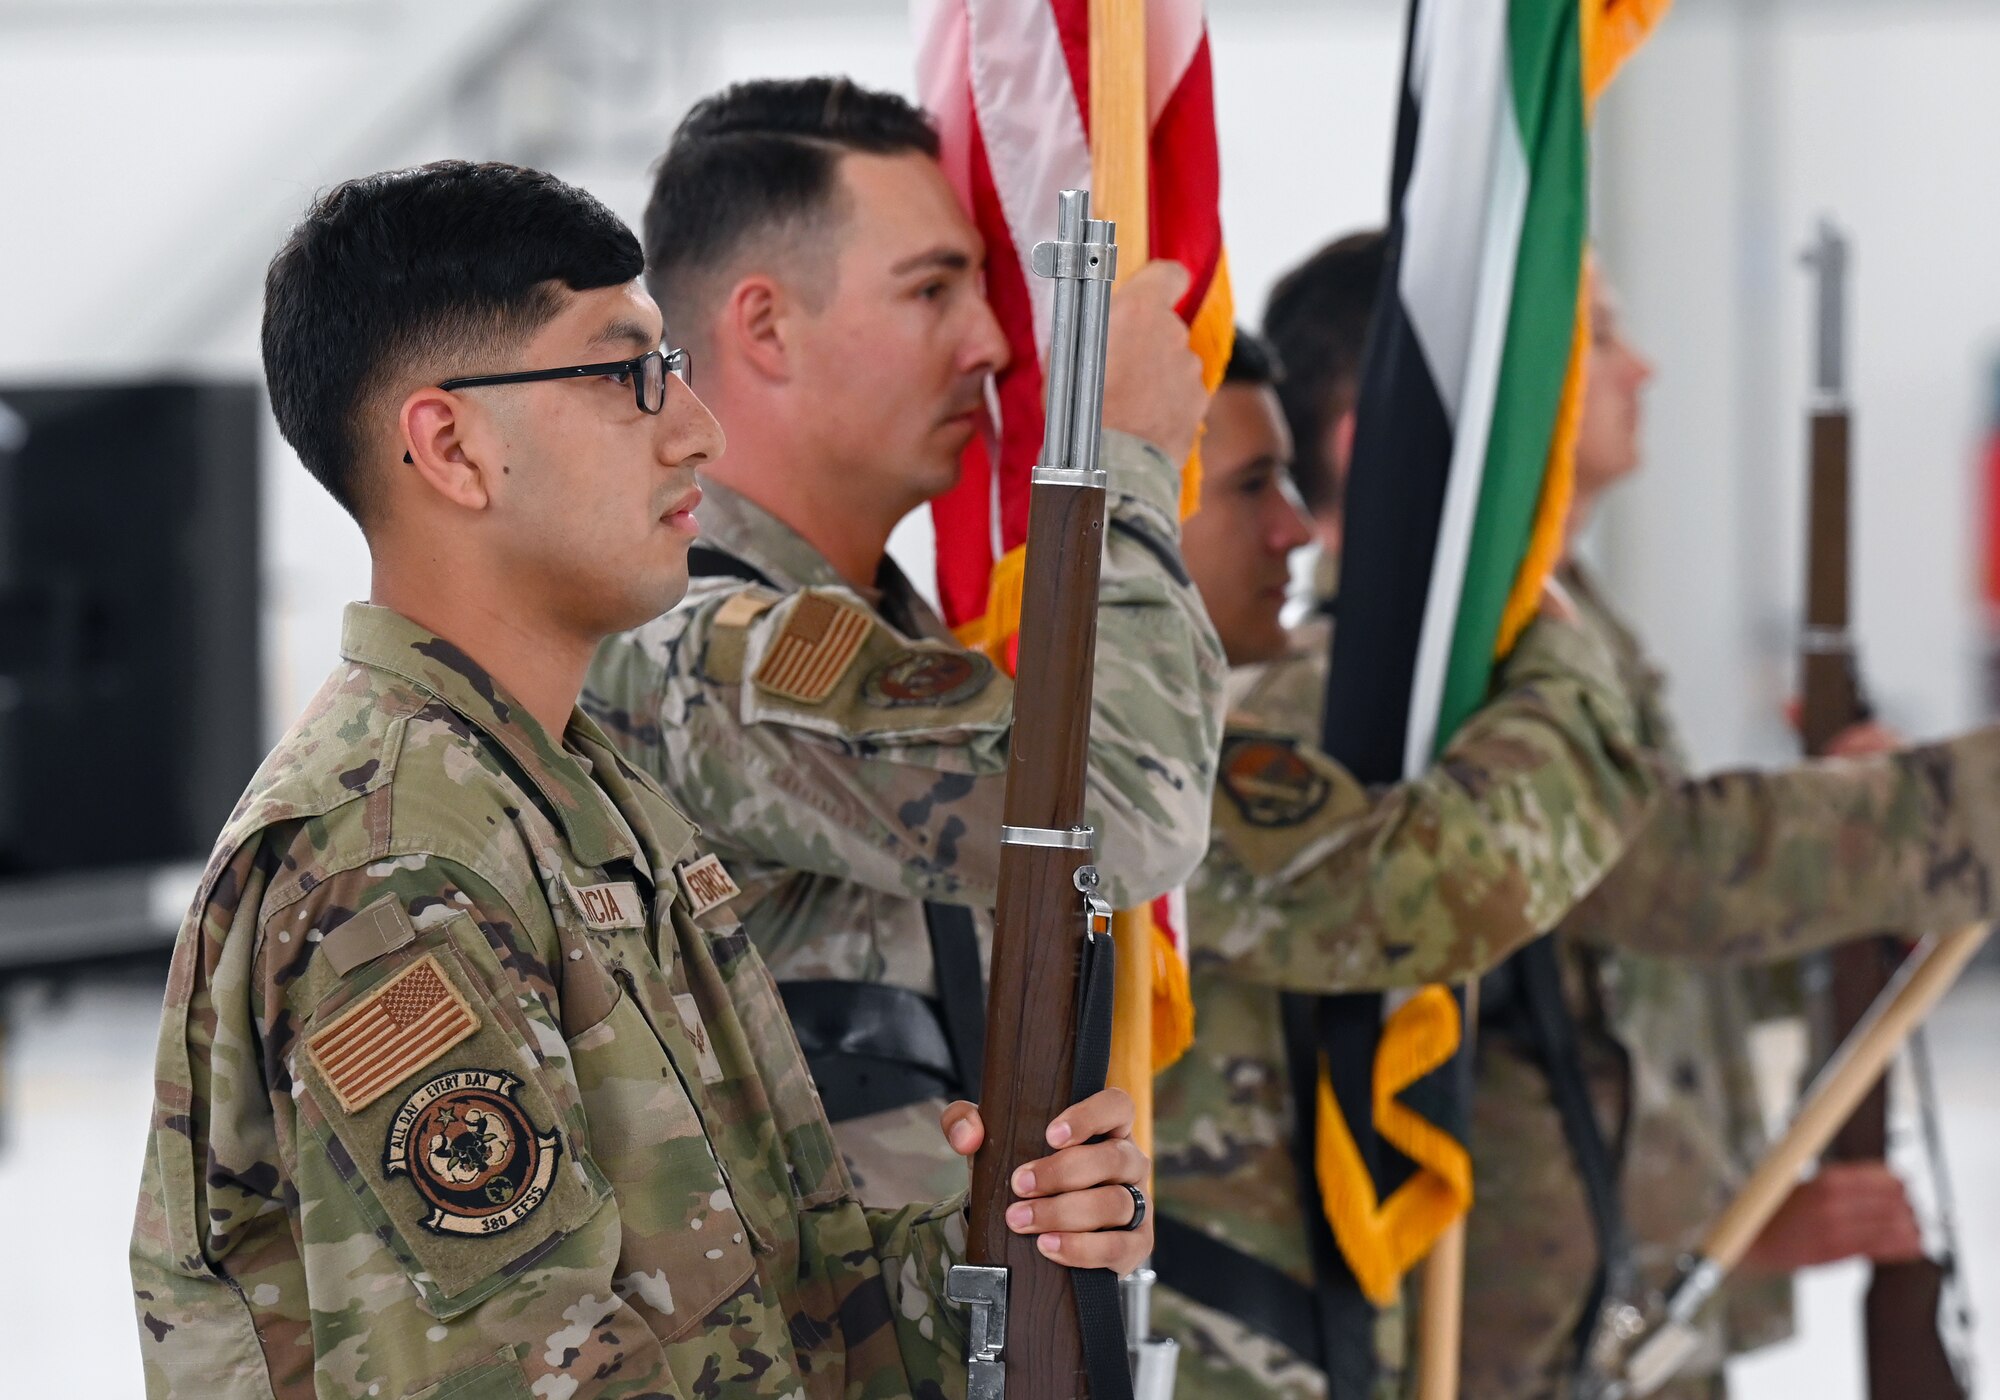 A photo of the honor guard holding flags and rifles.